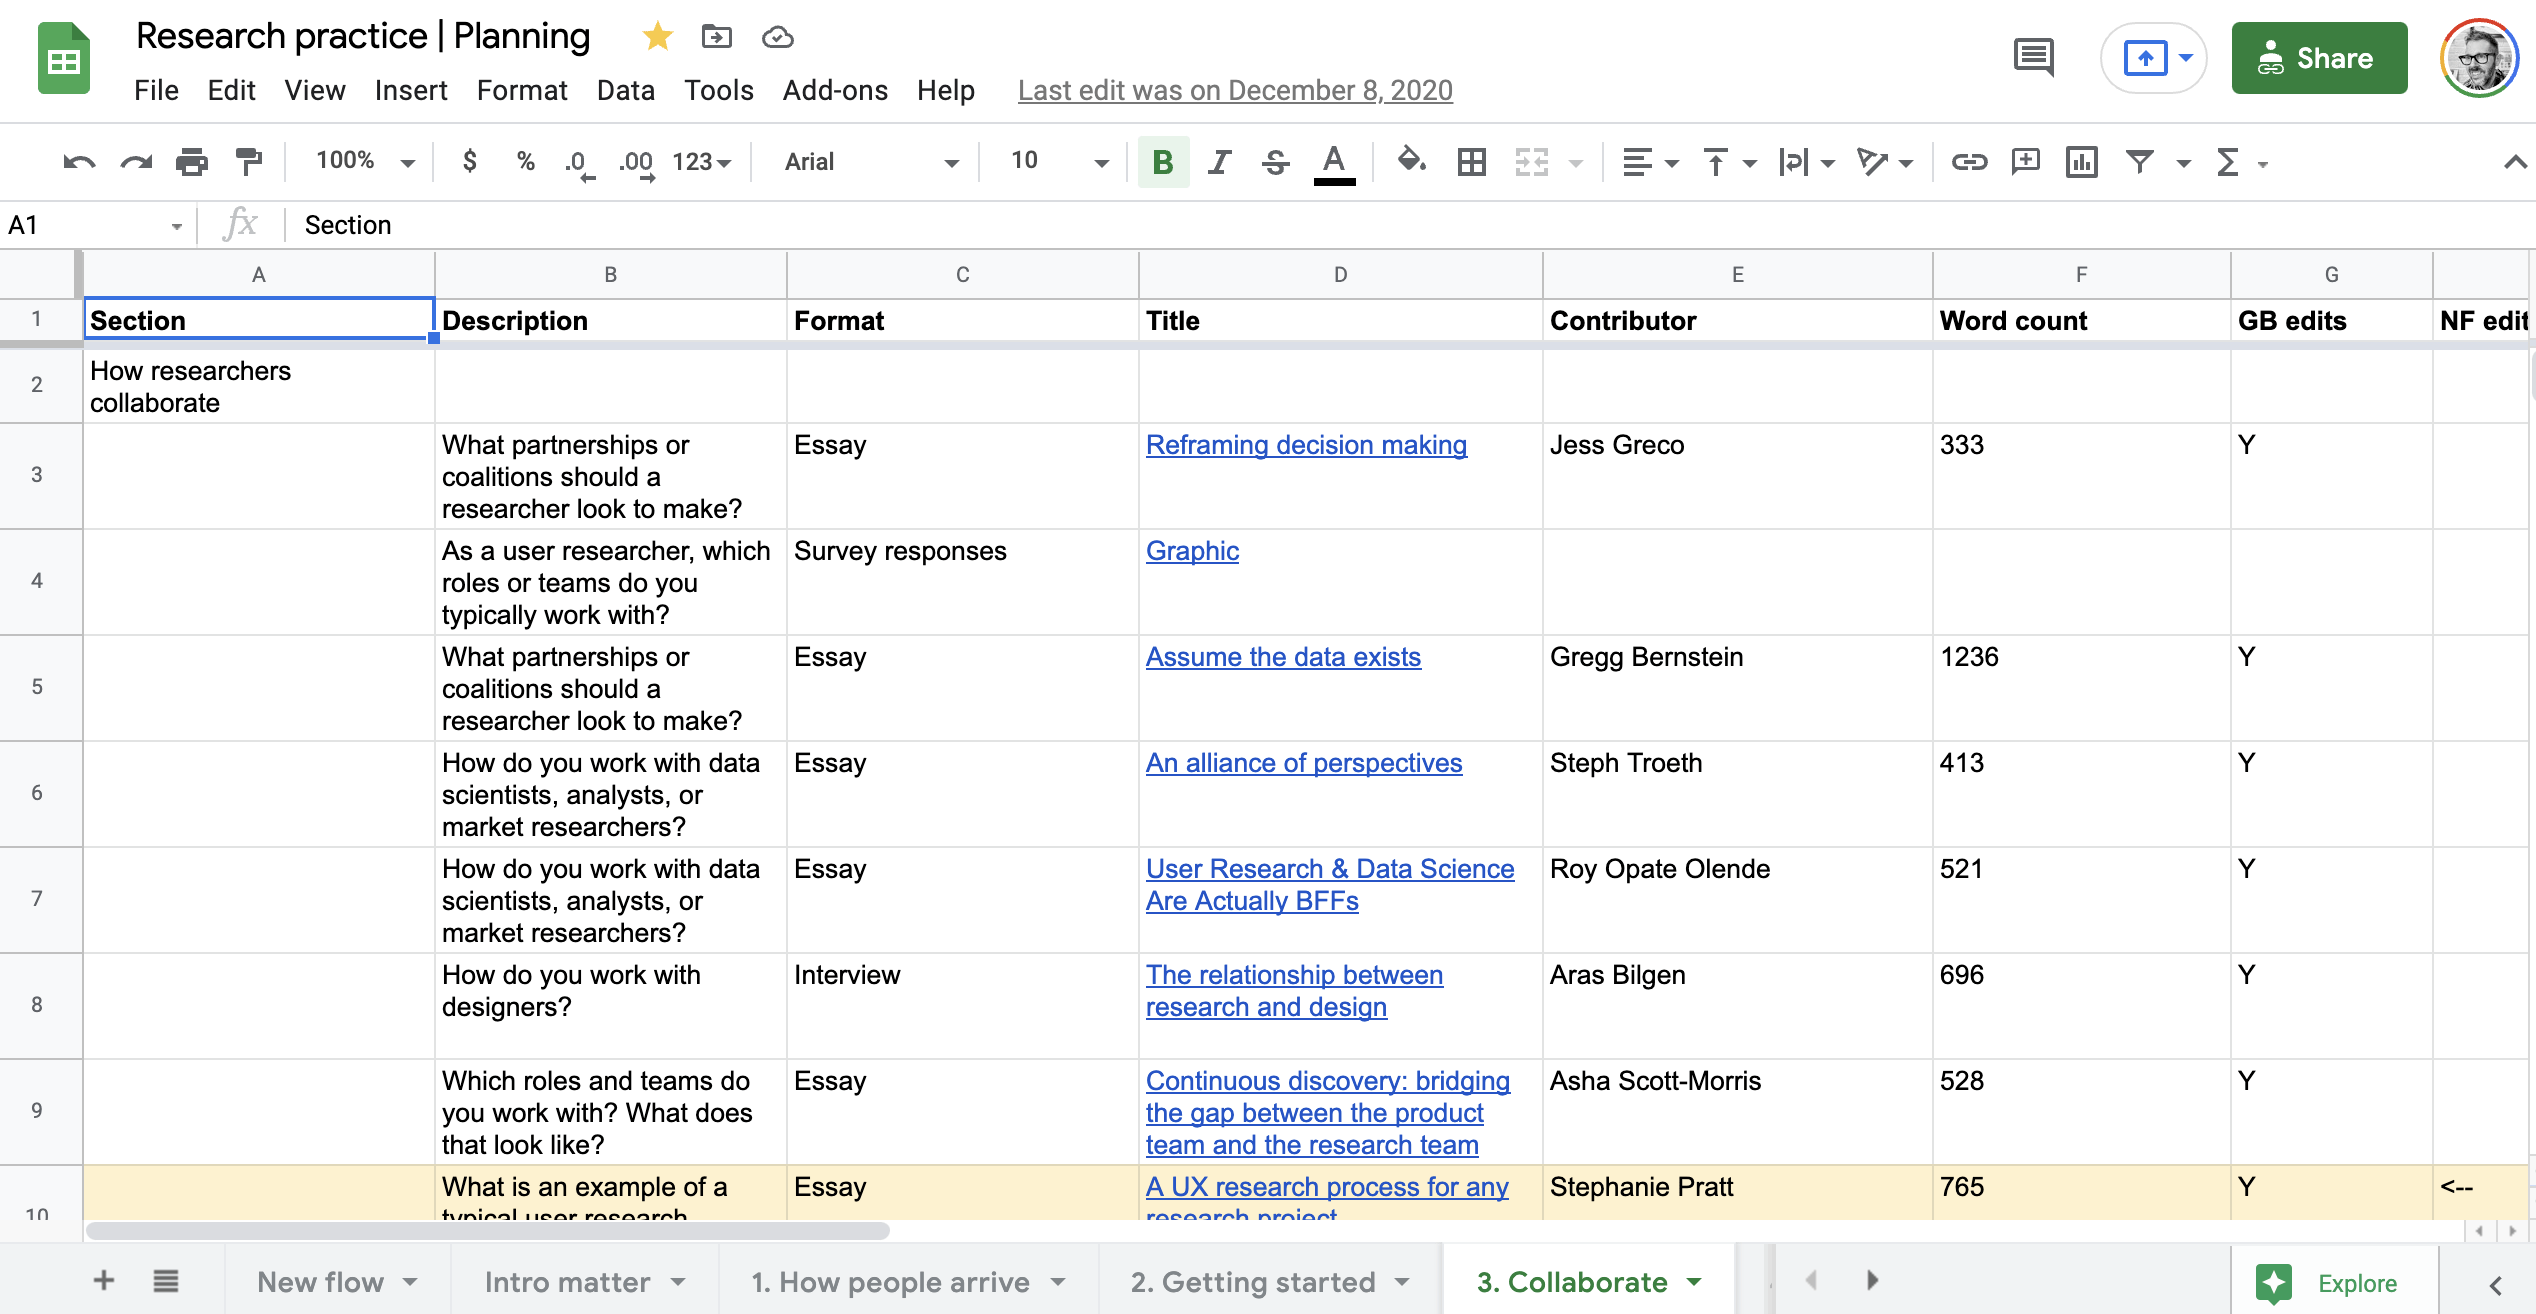 The Research Practice planning spreadsheet